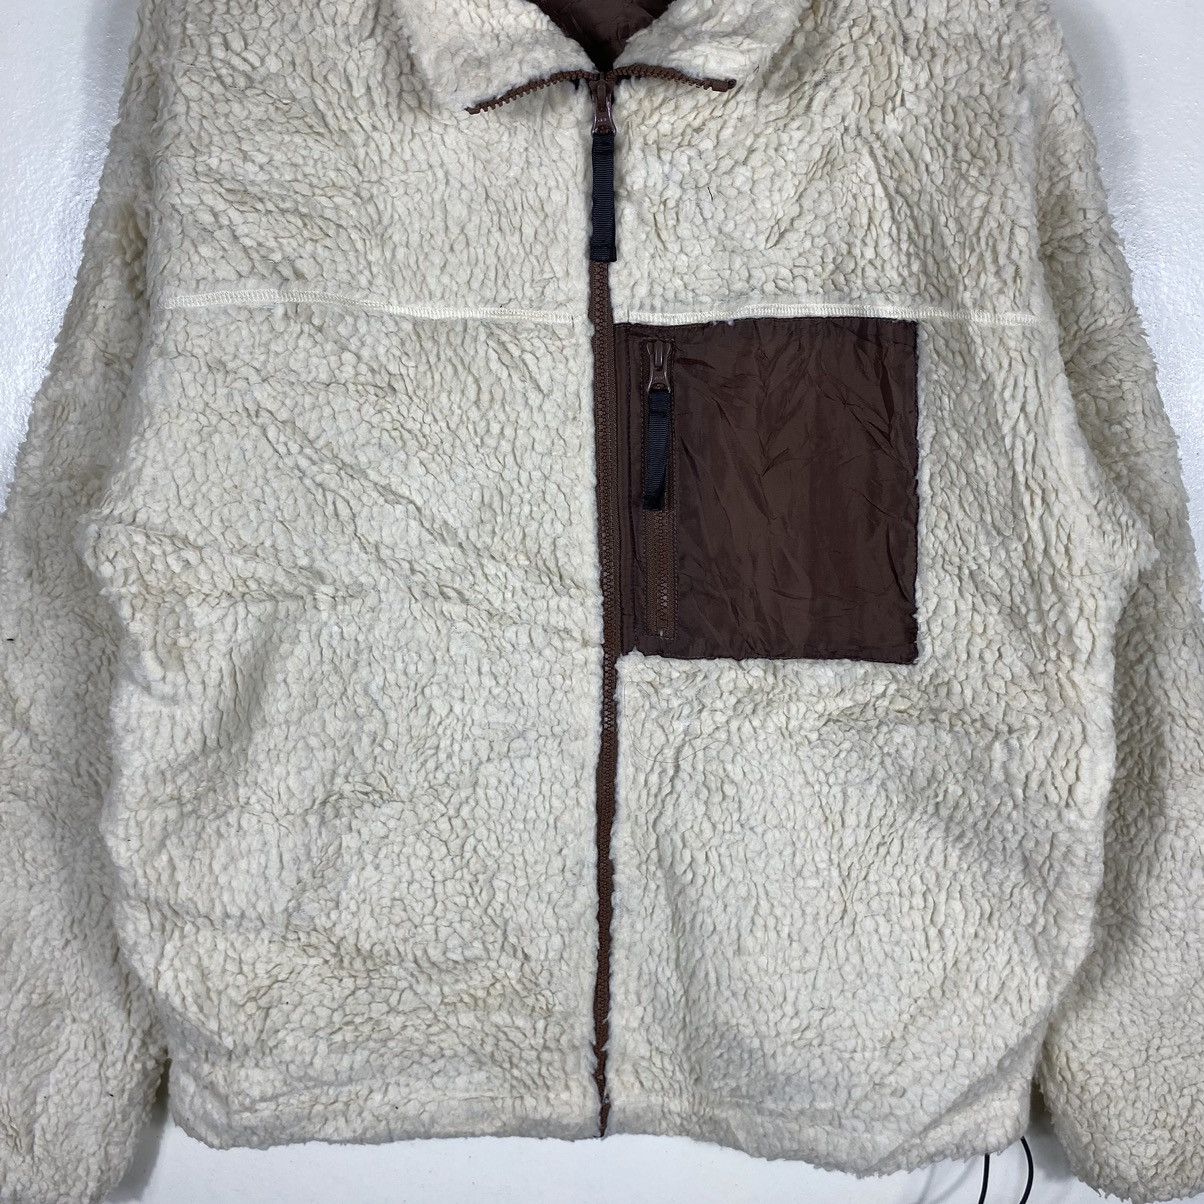 Japanese Brand Japanese Brand Wego Sherpa Jacket Patagonia Style Size US S / EU 44-46 / 1 - 2 Preview